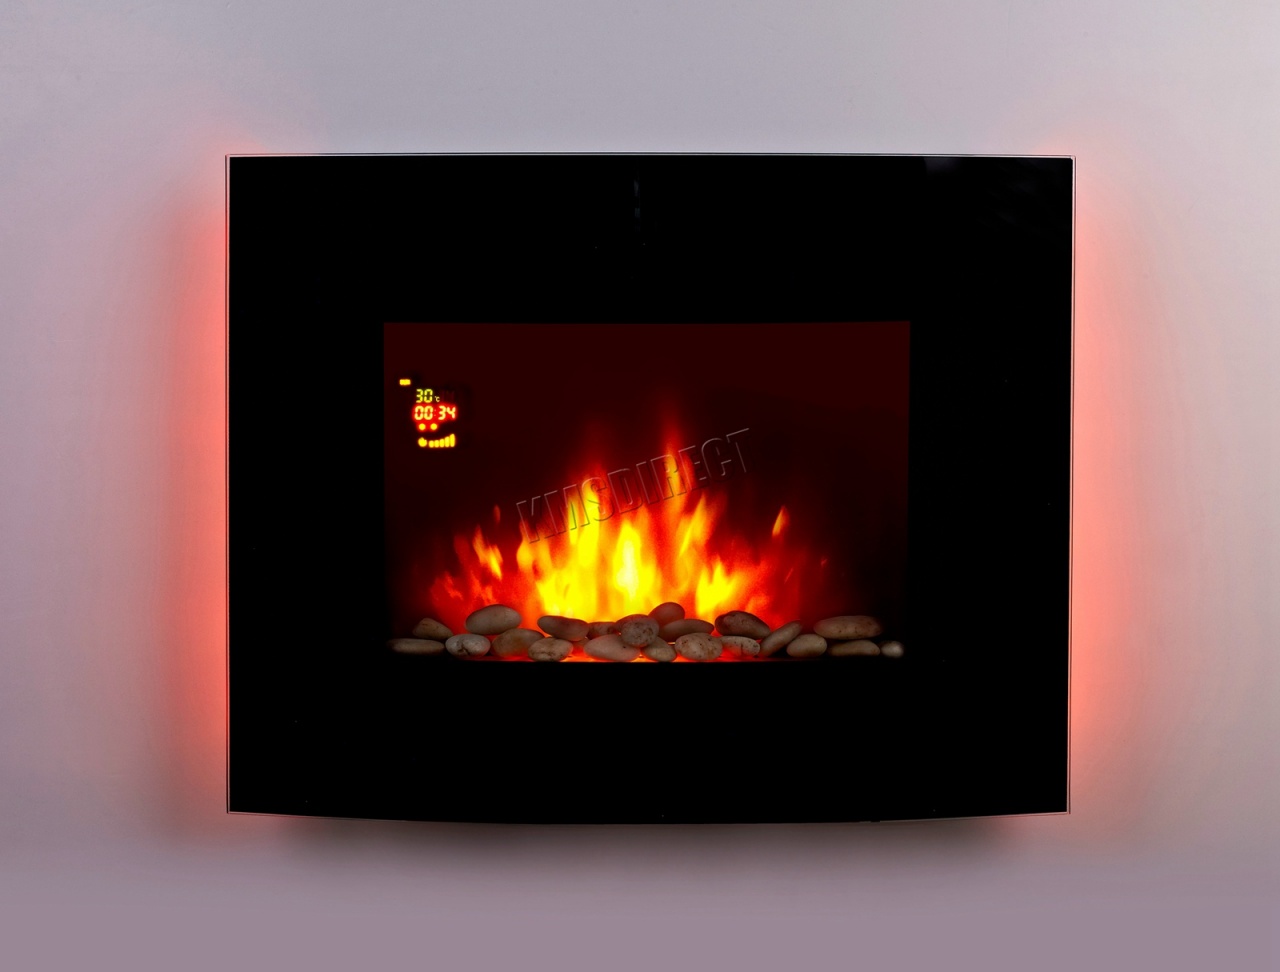 Clearance Big Lots Fireplace Best Of Big Lots Electric Fireplace Tv Stand – Fireplace Ideas From